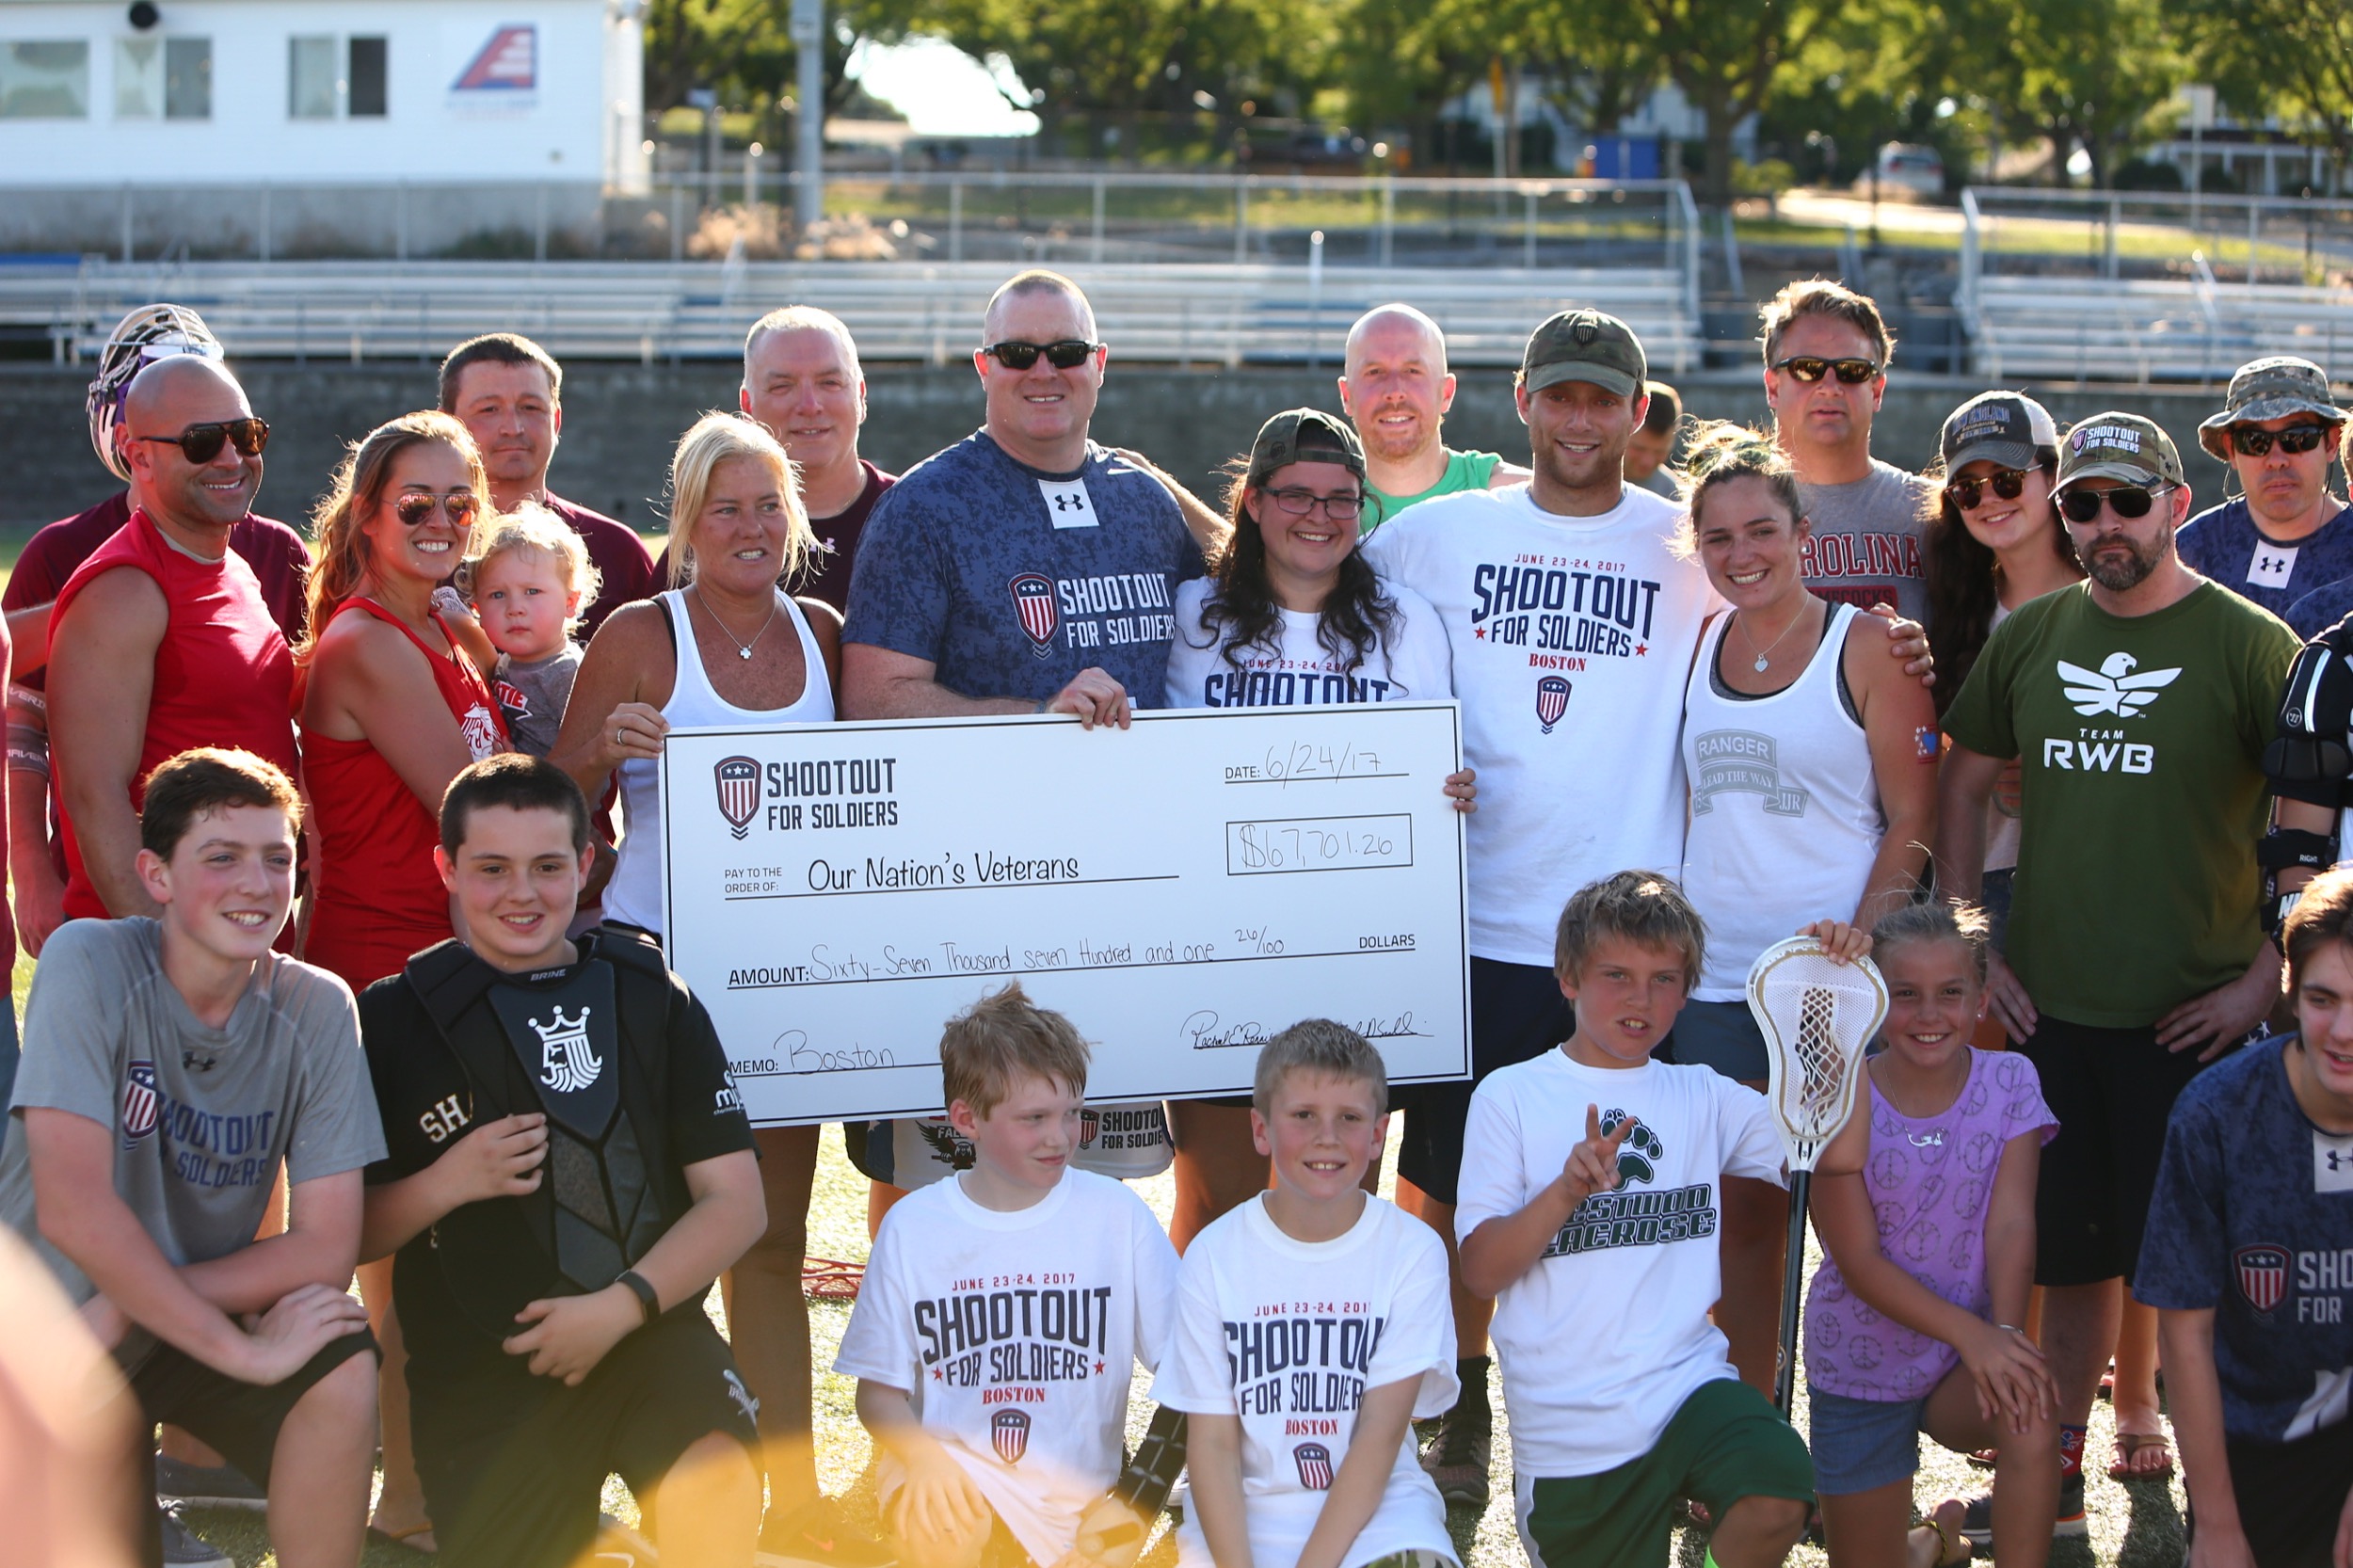 Shootout for Soldiers Boston Raises $67,000+ for Veteran Charities!